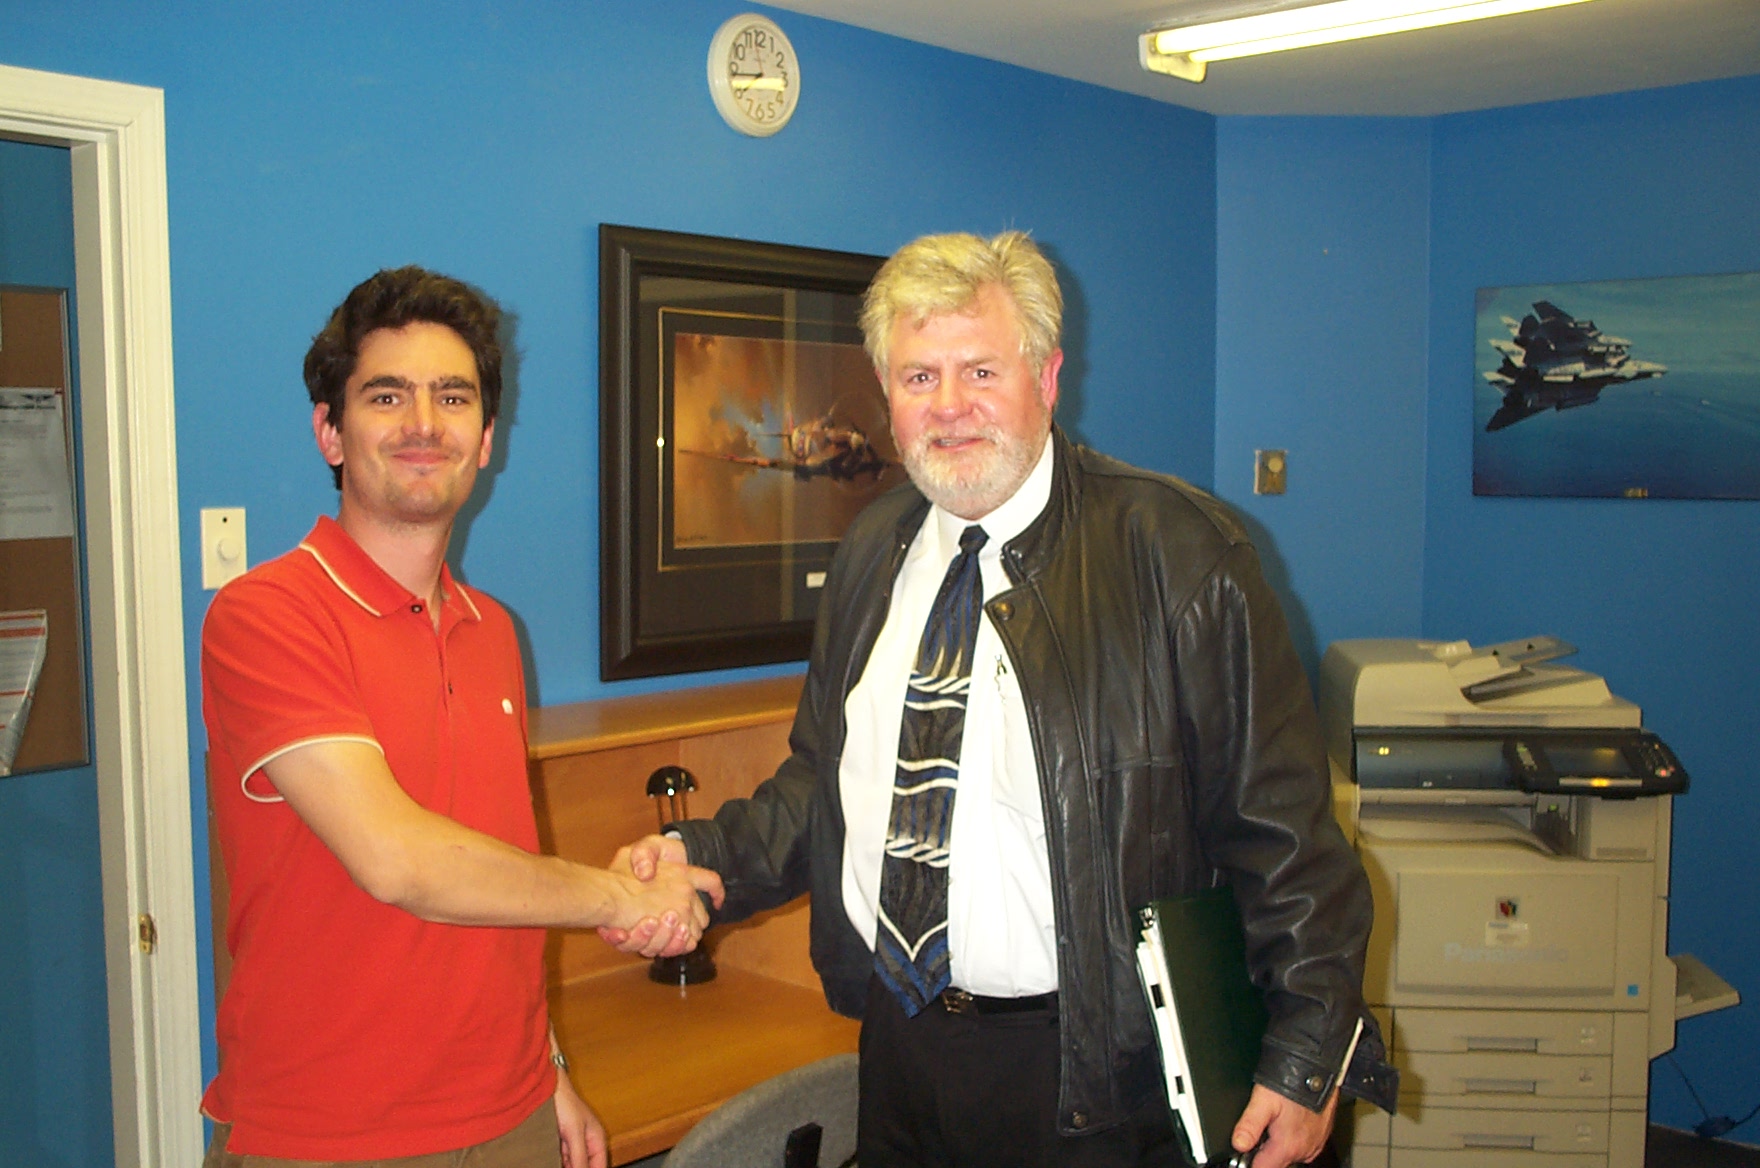 Jonathan King receives congratulations from Pilot Examiner Paul Harris following the successful completion of Jonathan's Commercial Pilot Flight Test on September 11, 2010. Congratulations also to Jonathan's Flight Instructor, Beda Grunder. Langley Flying School.